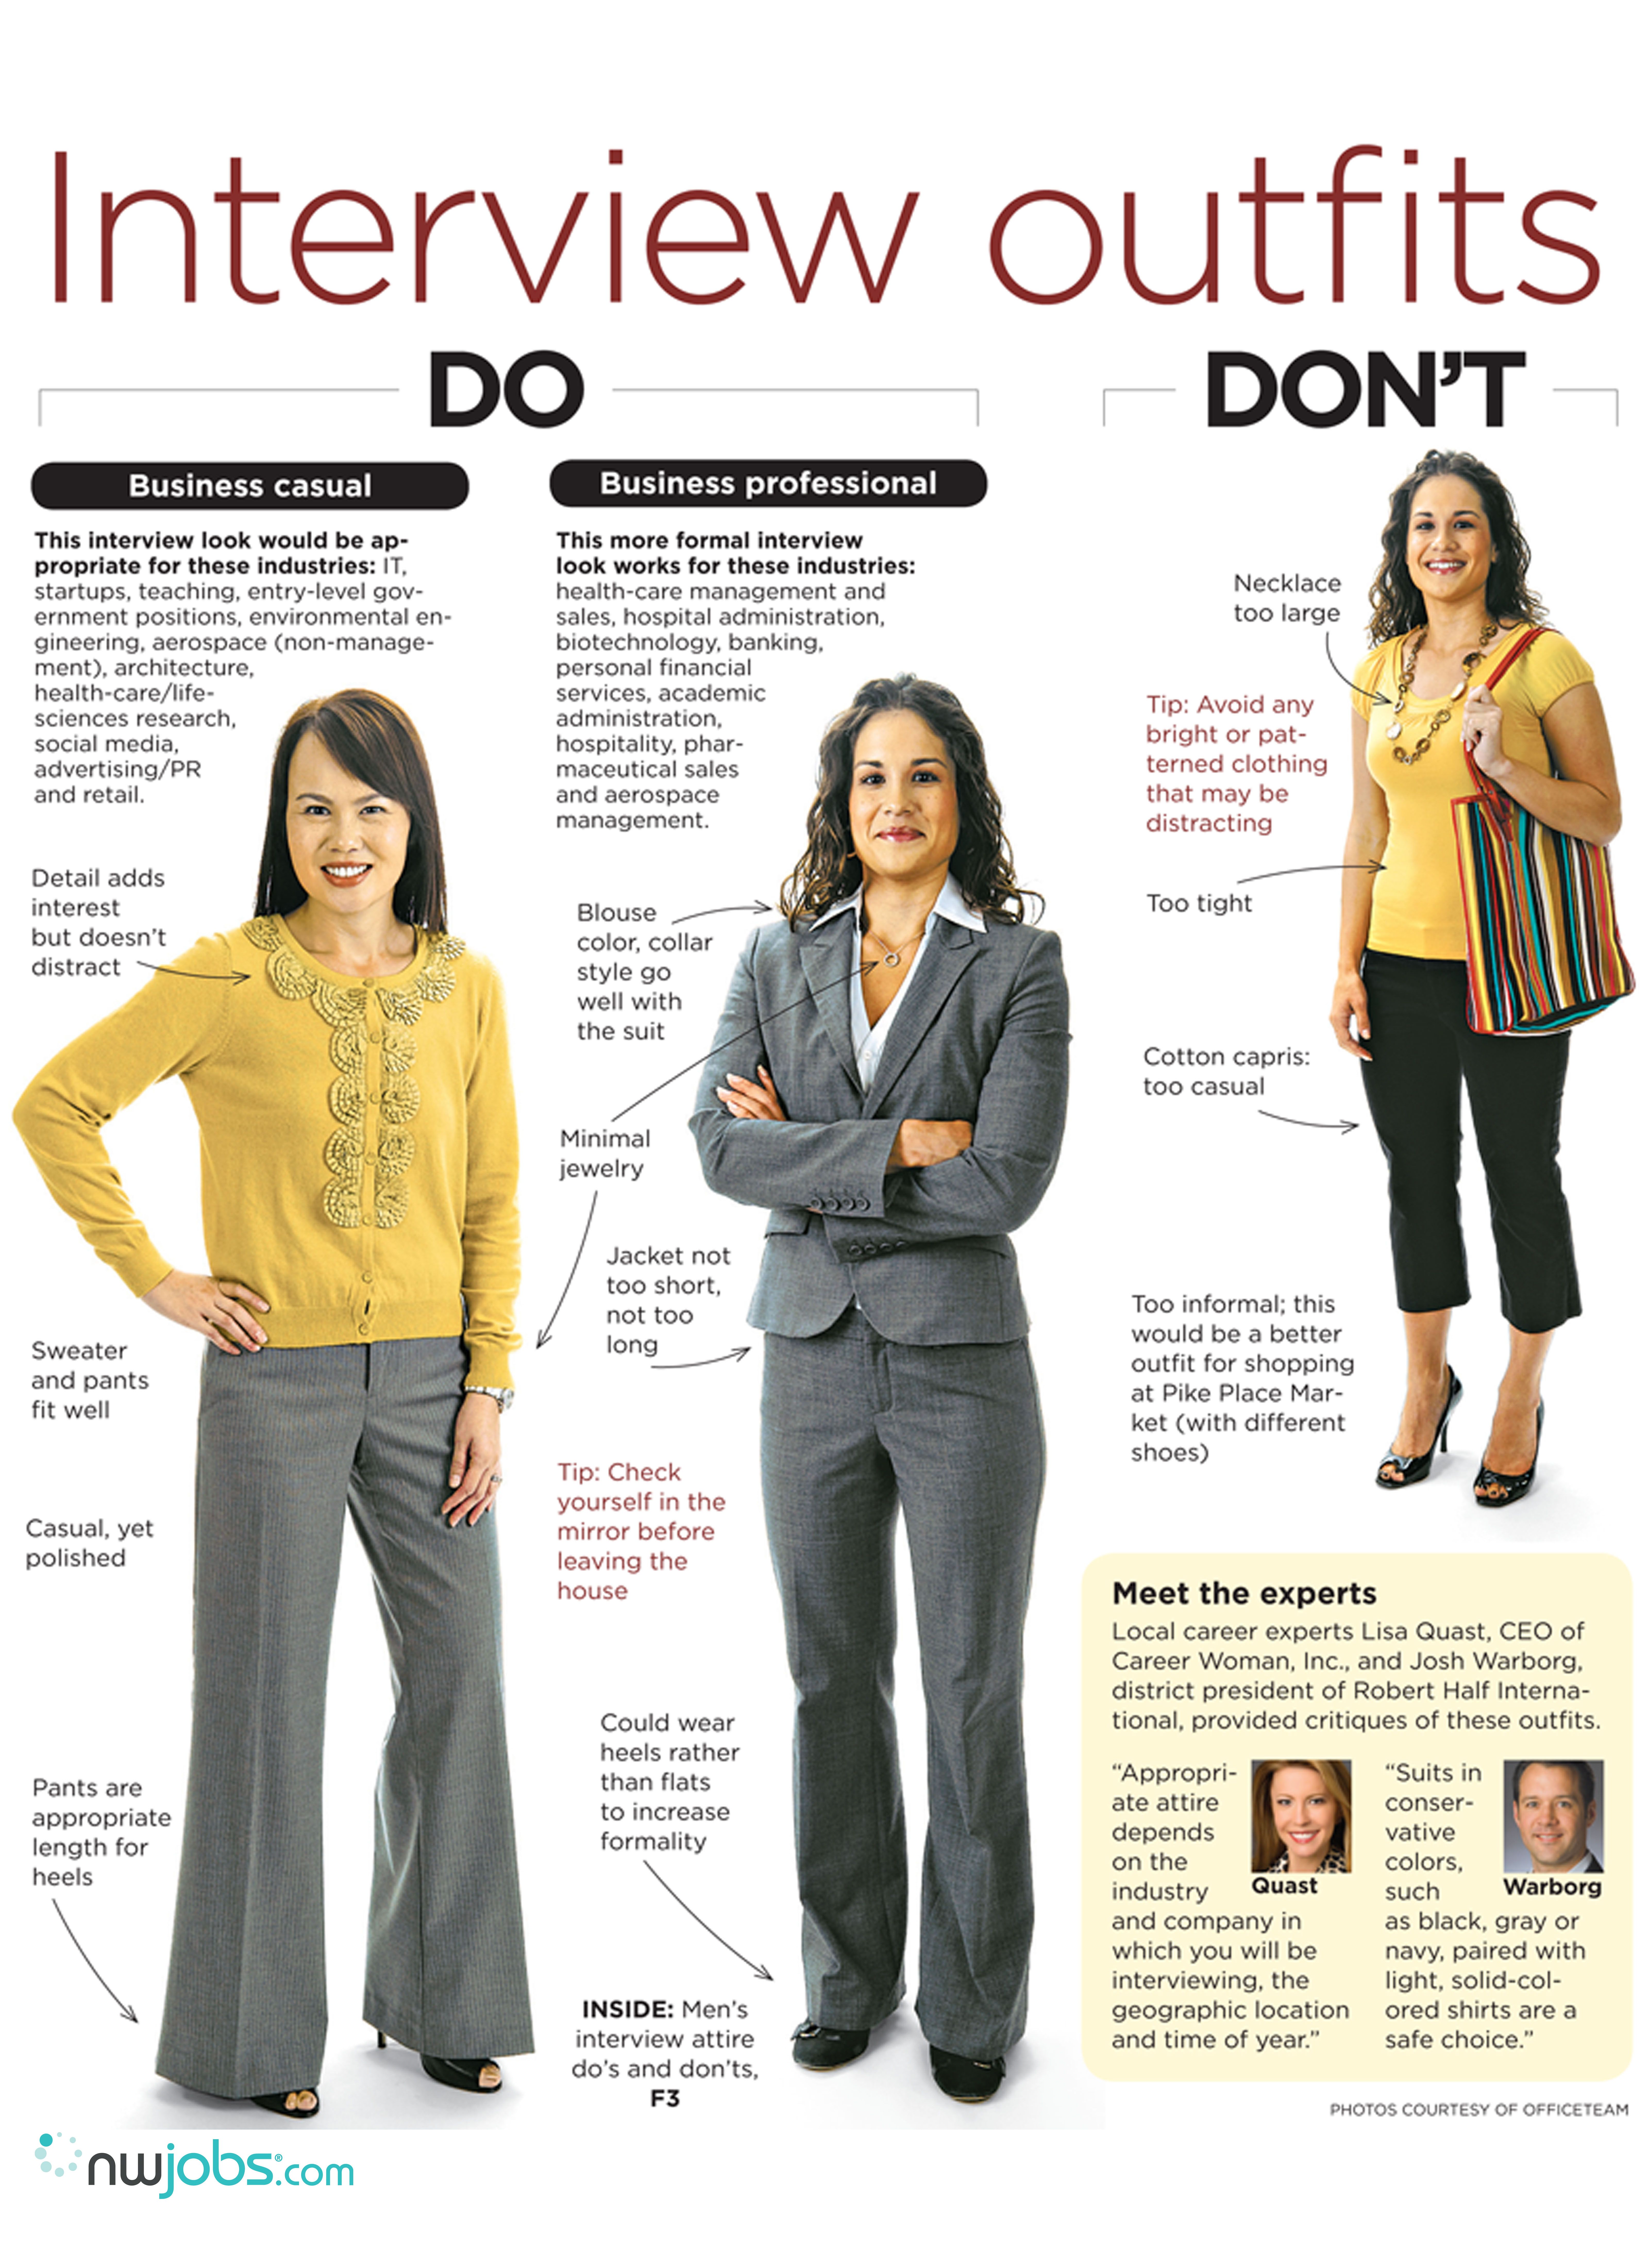 Can I Wear A Dress To An Interview? – Interview Dressing Tips